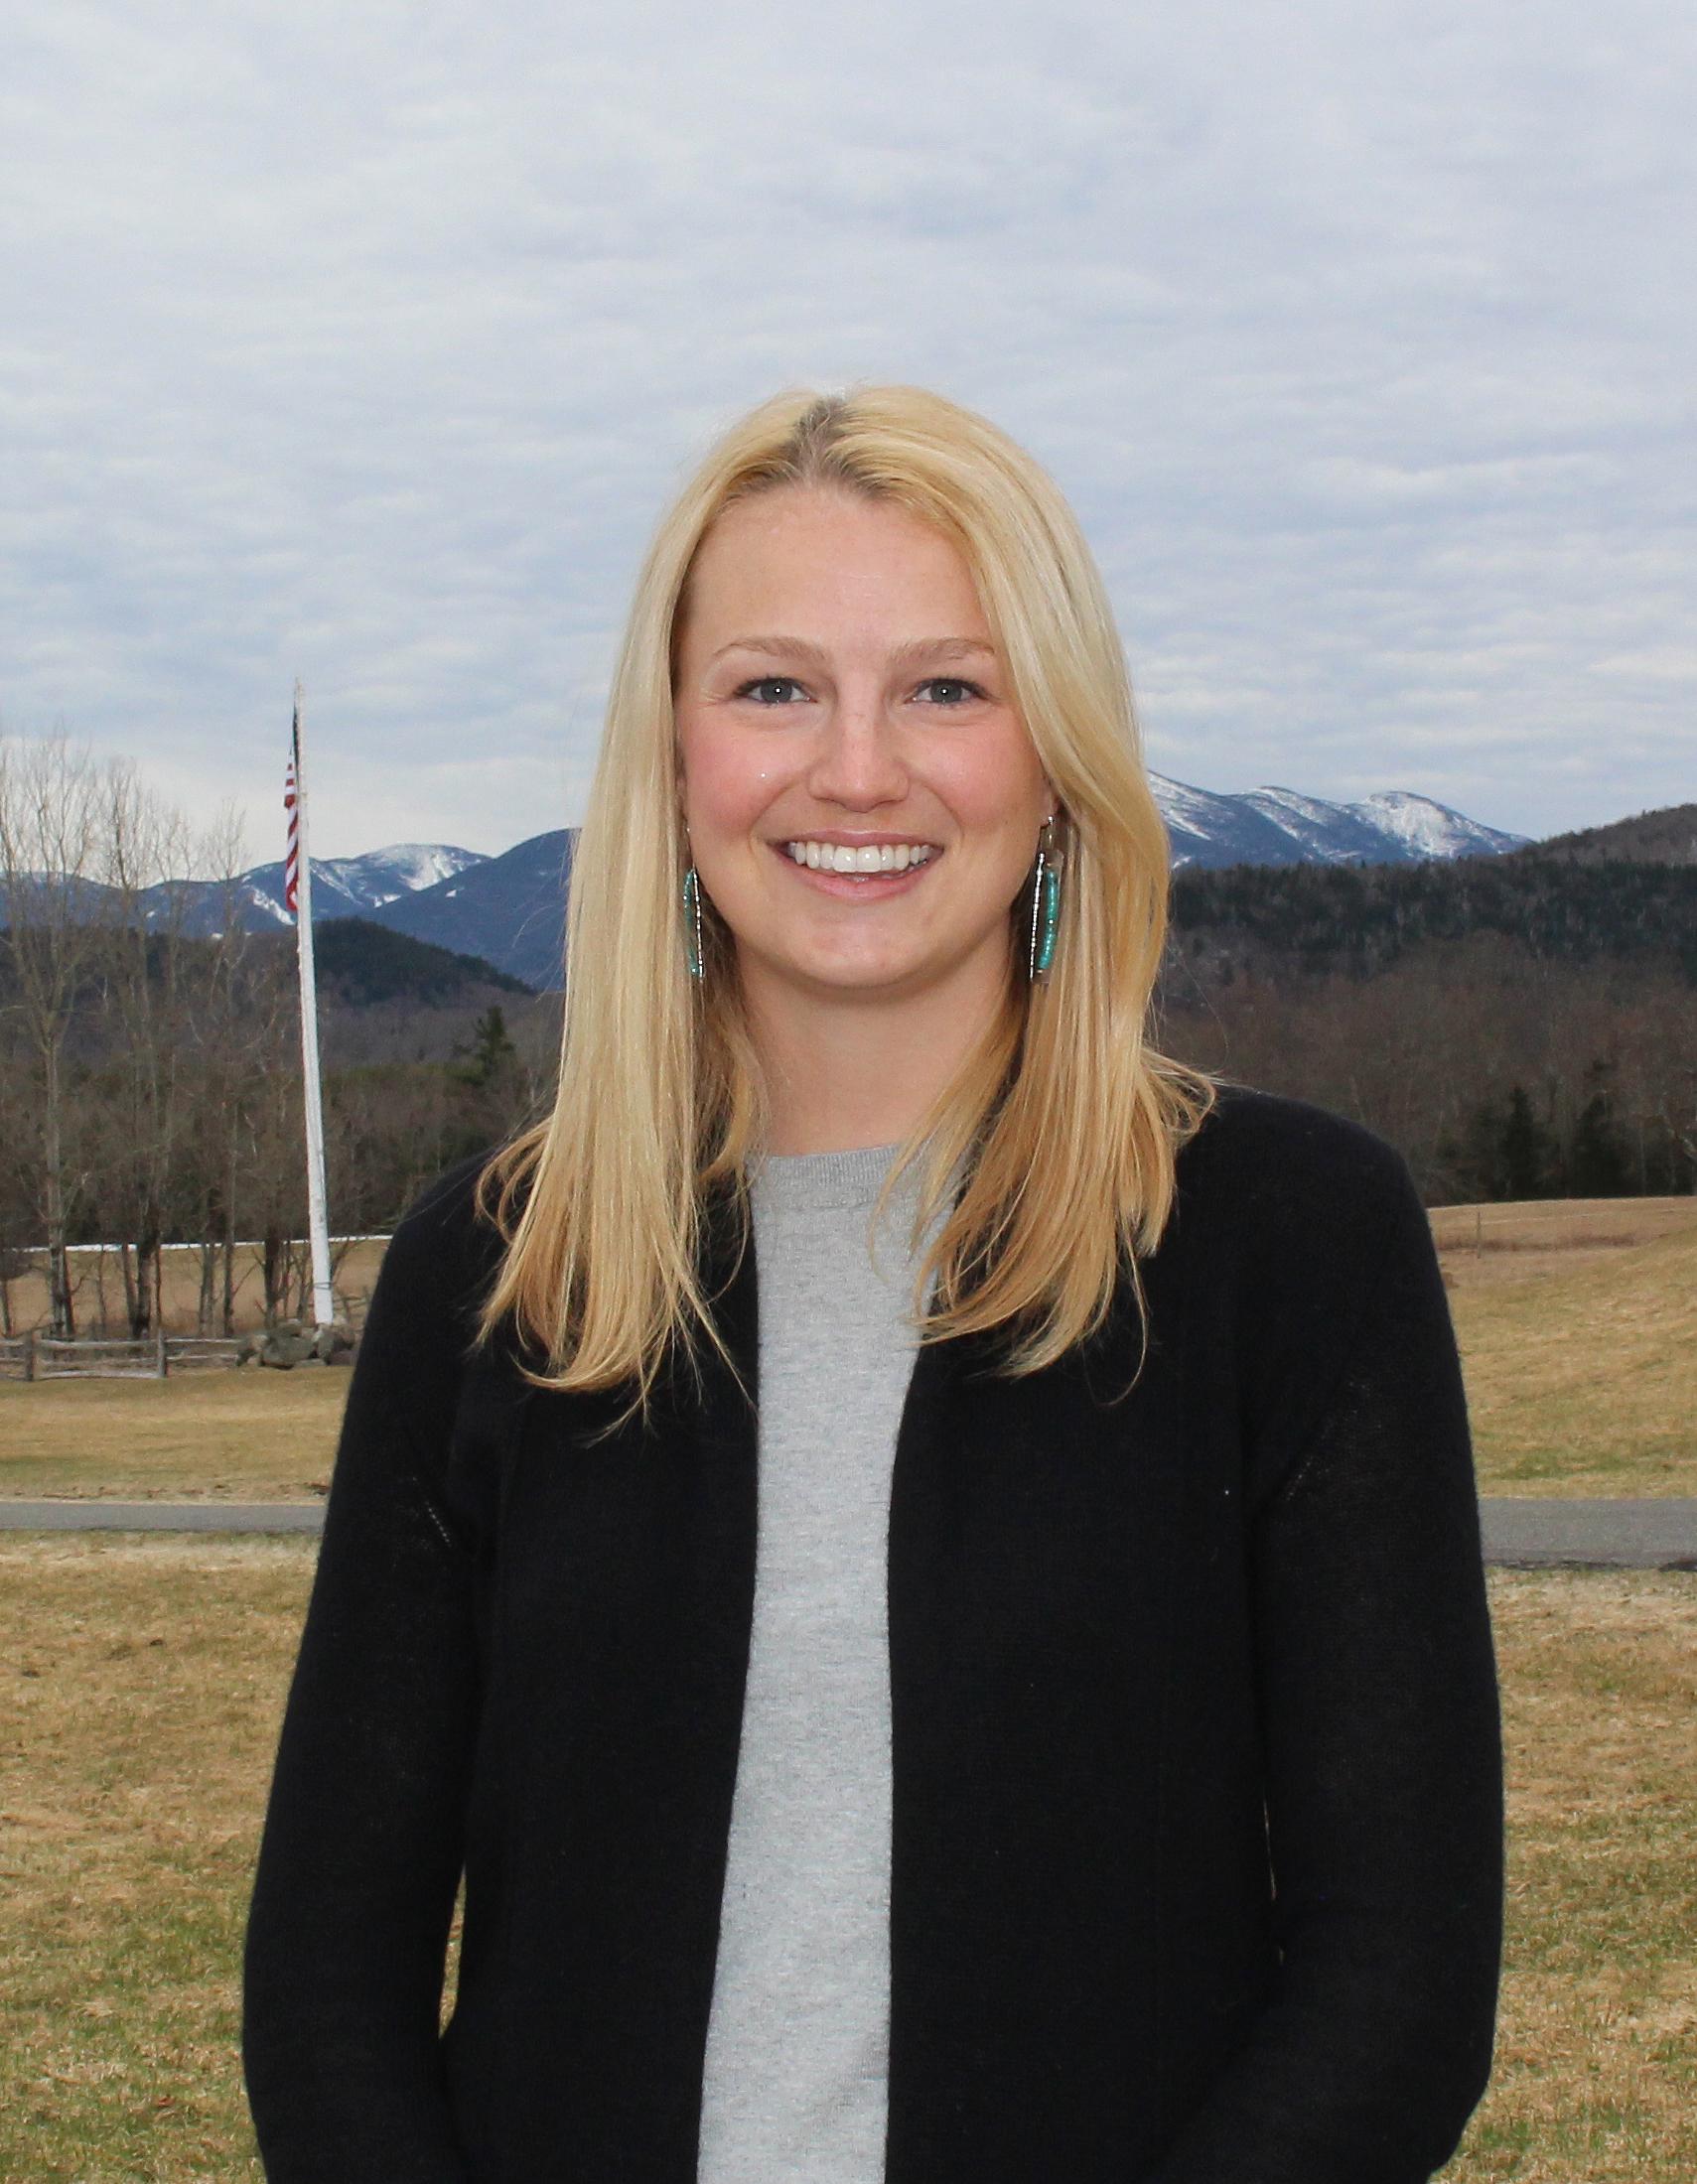 Stanzi Bliss, Director of Giving and Communications at Adirondack Foundation